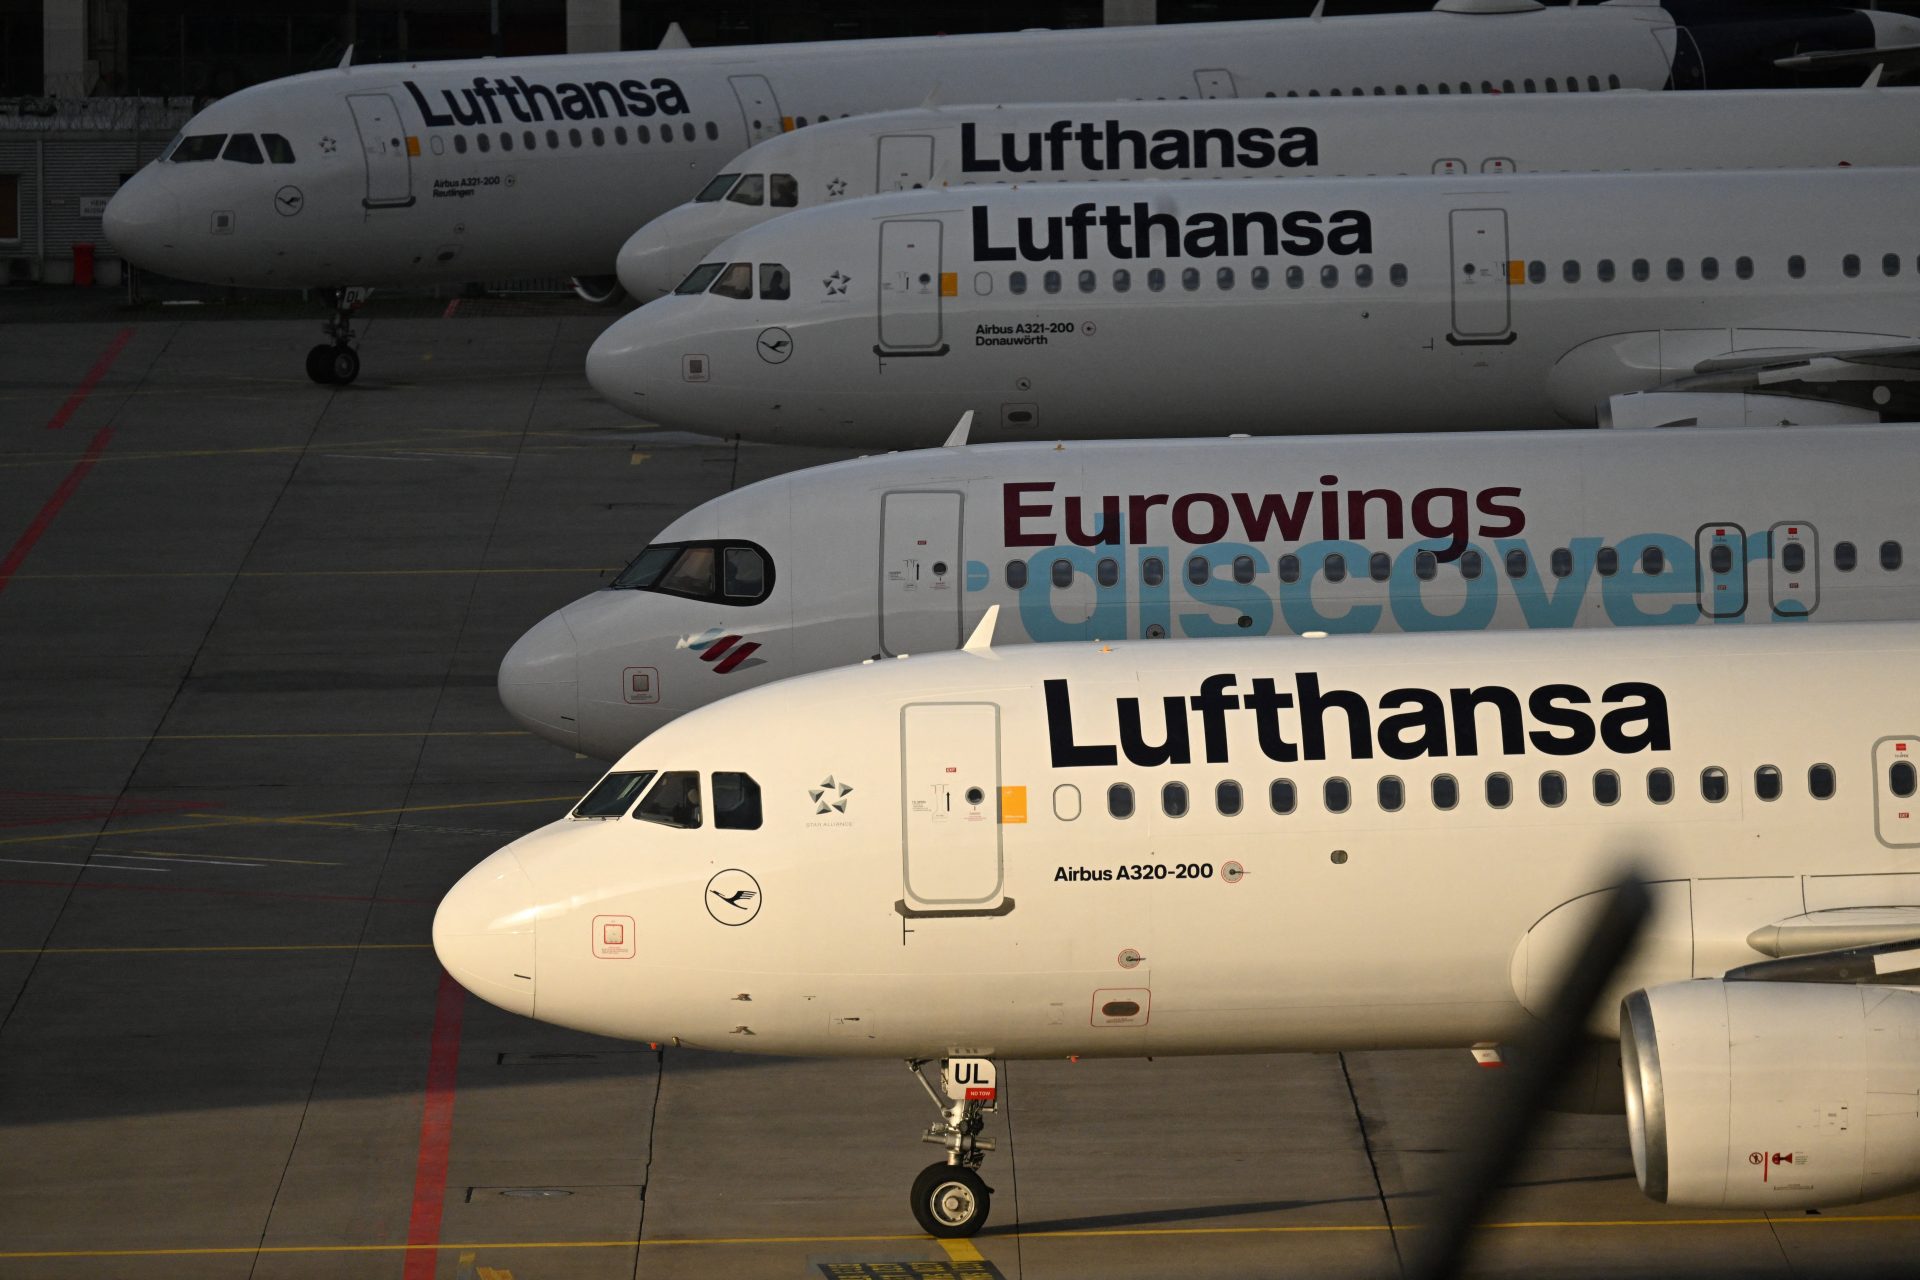 Lufthansa will have about 20 fewer planes in its fleet